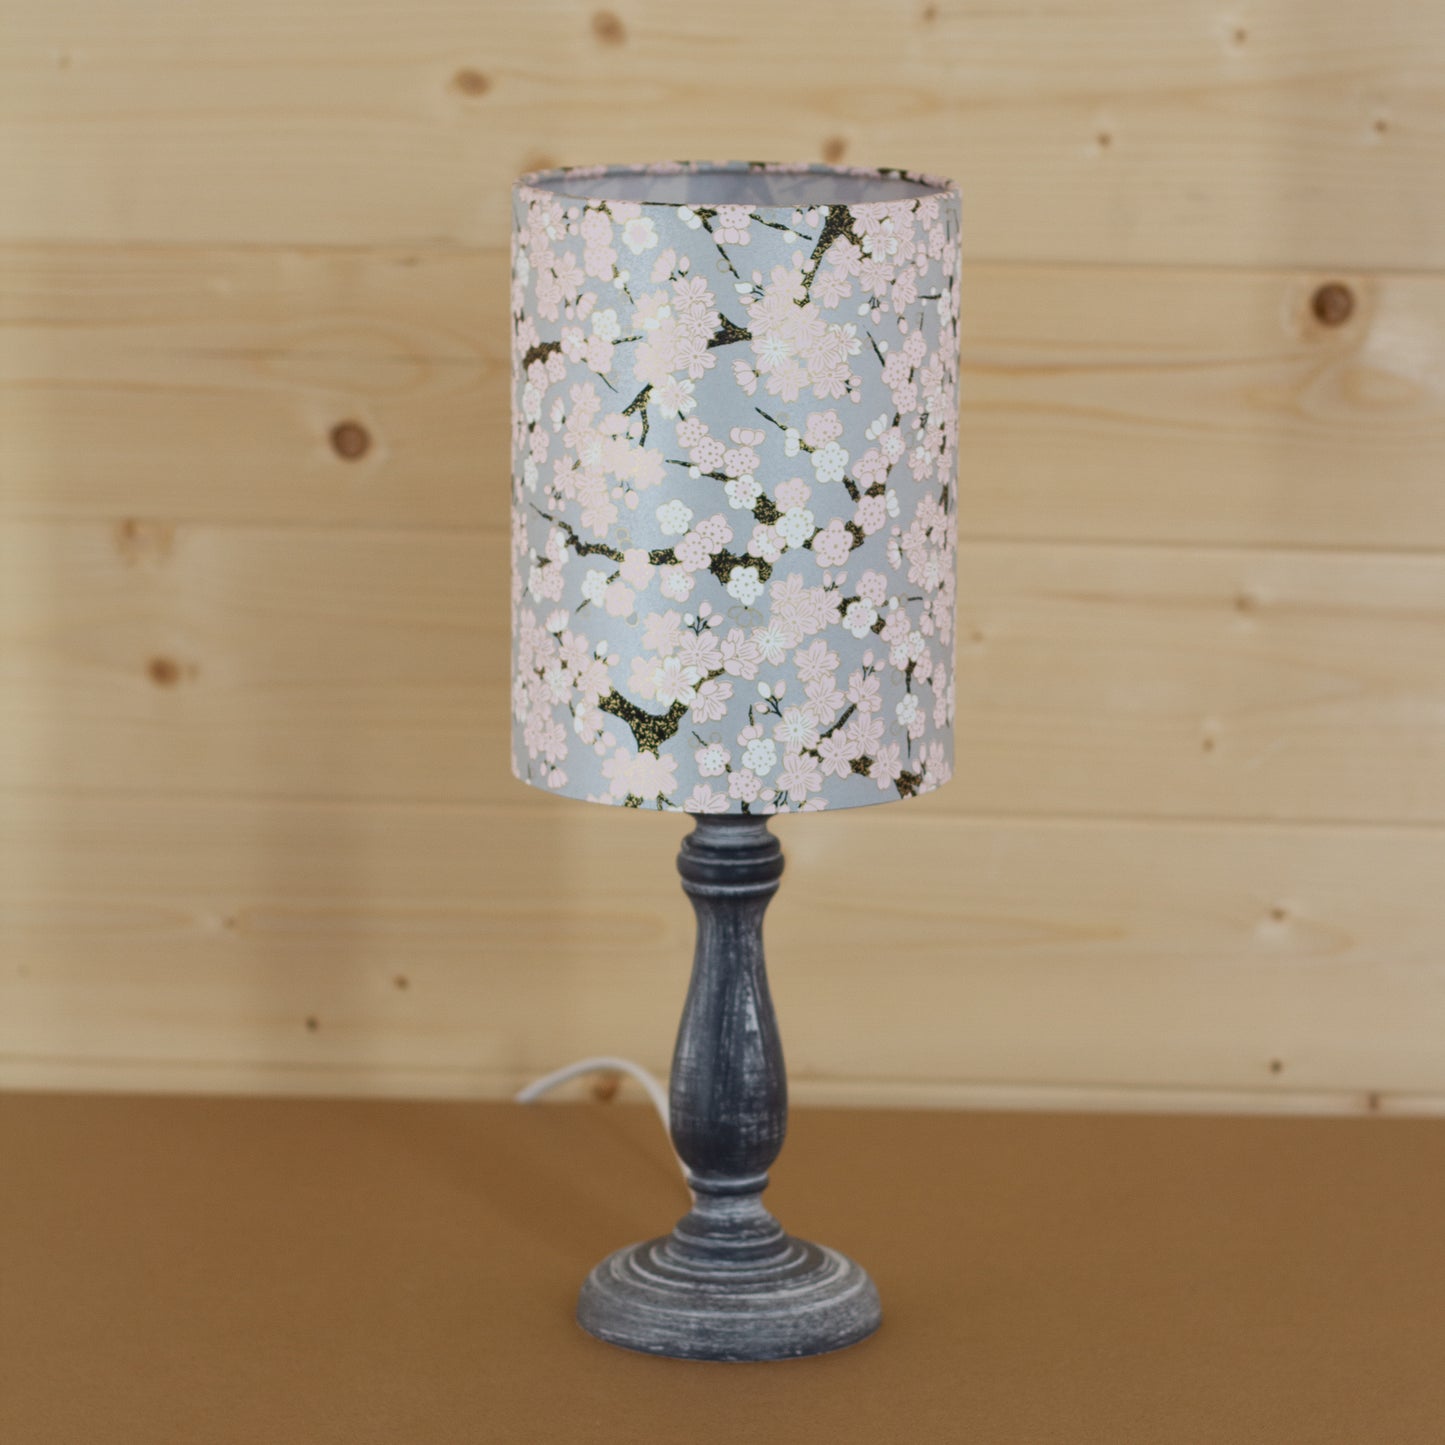 Paros Wooden Table Lamp with a Drum Shade (15cm X 20cm) in W02 ~ Pink Cherry Blossom on Grey